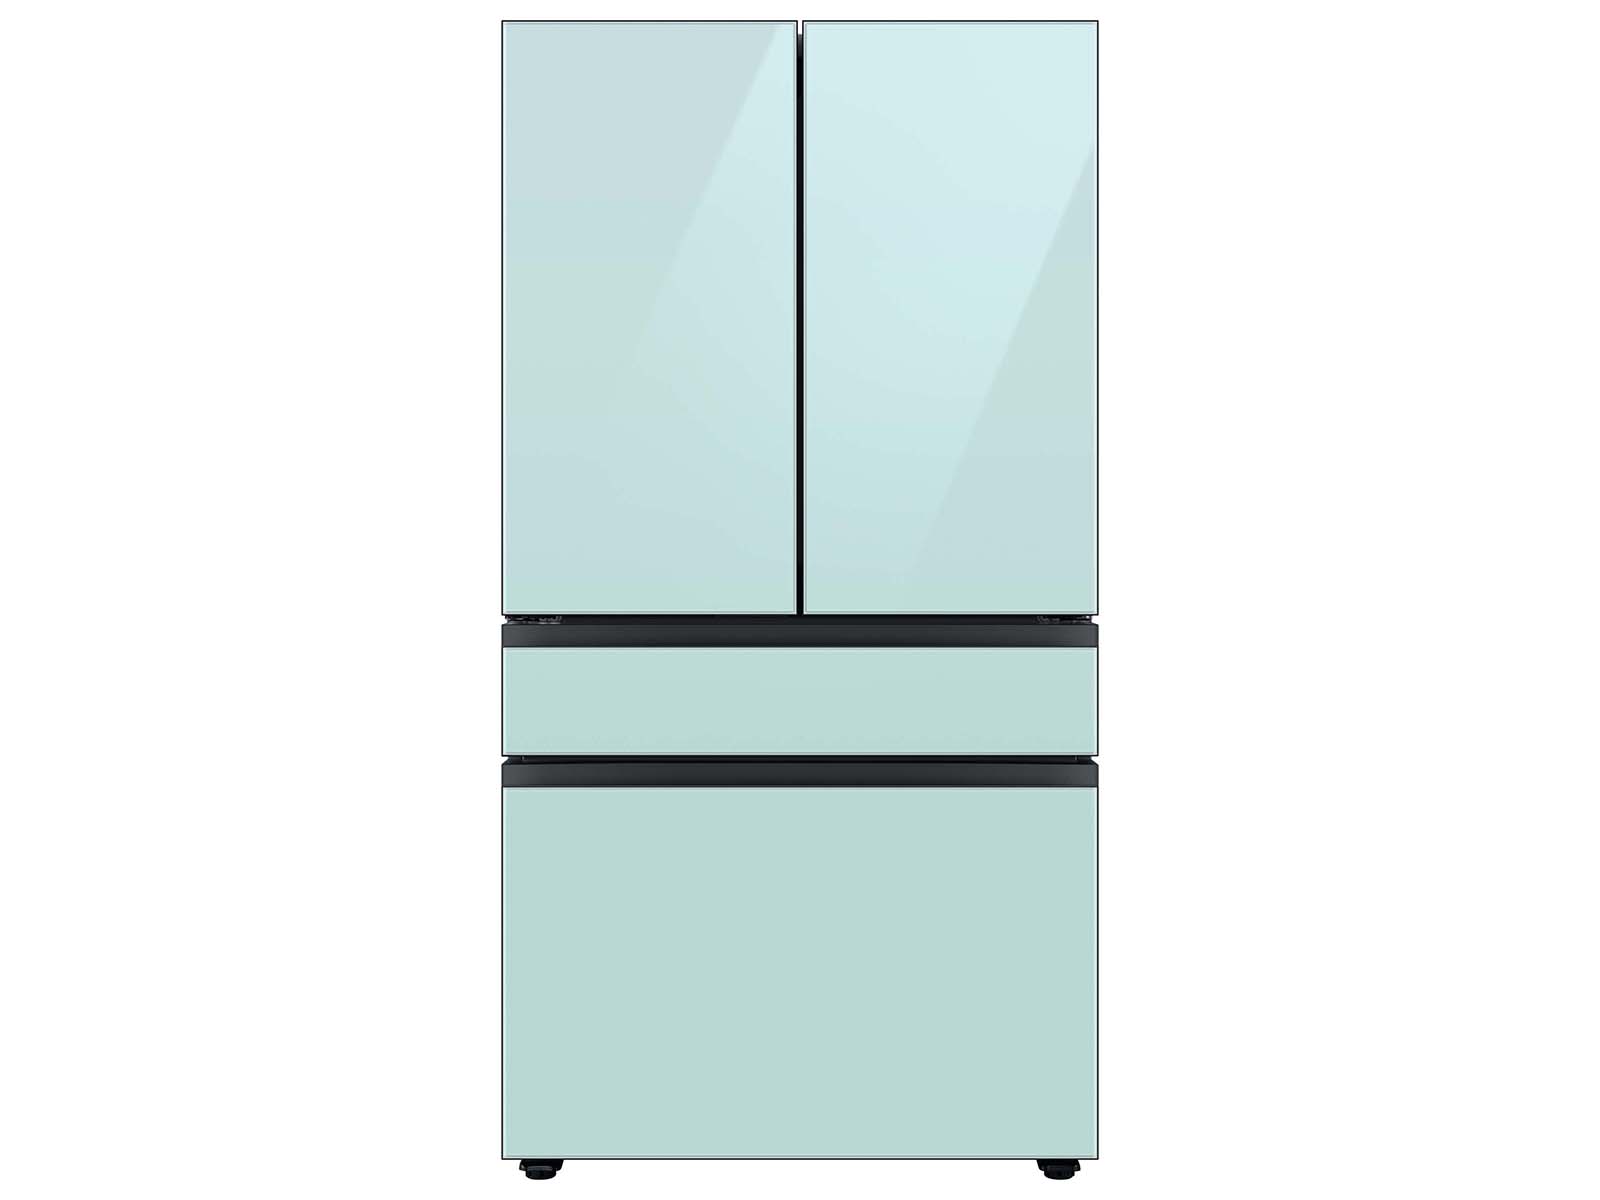 Samsung Bespoke 4-Door French Door Refrigerator in White Glass (23 cu. ft.) with AutoFill Water Pitcher and Customizable Door Panel Colors in Morning Blue Glass